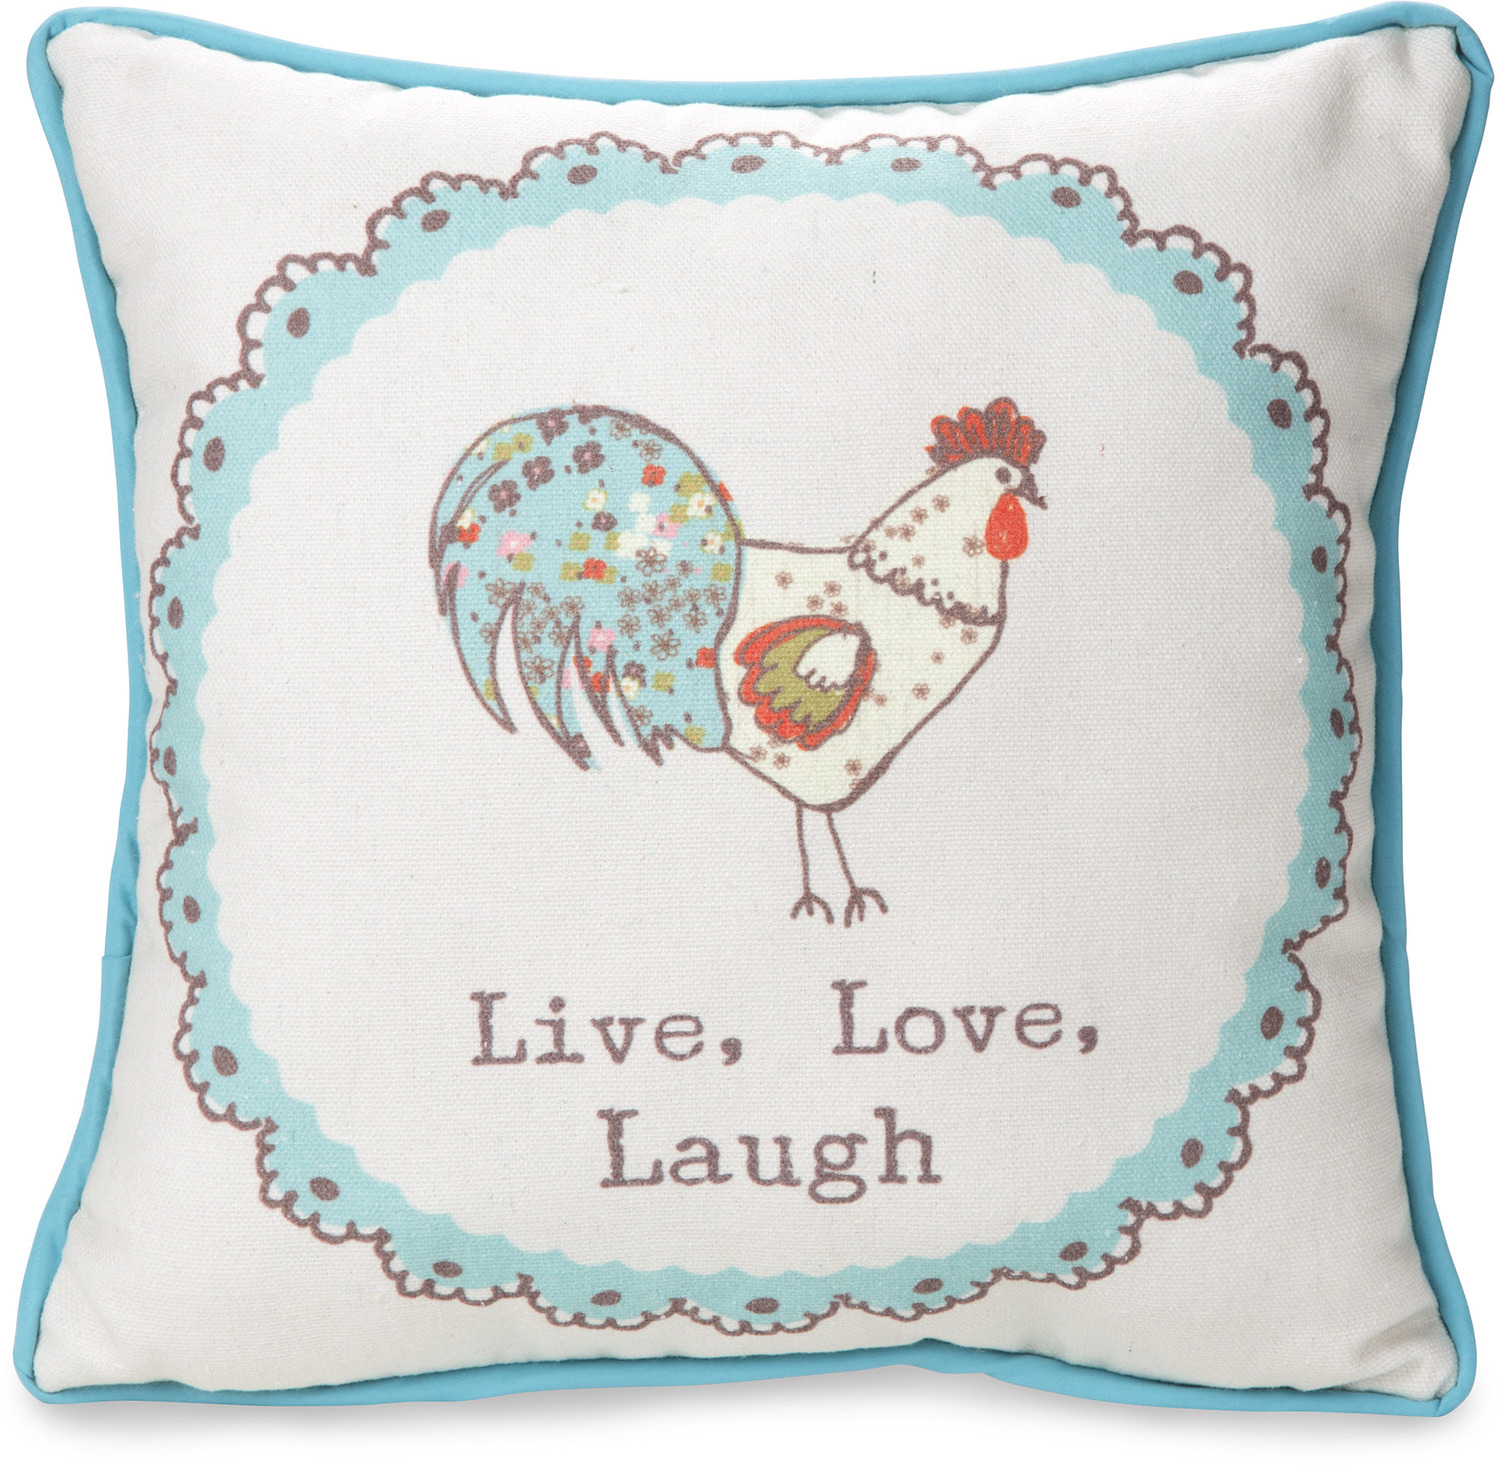 Live, Love, Laugh by Live Simply by Amylee - Live, Love, Laugh - 12" x 12" Canvas Pillow